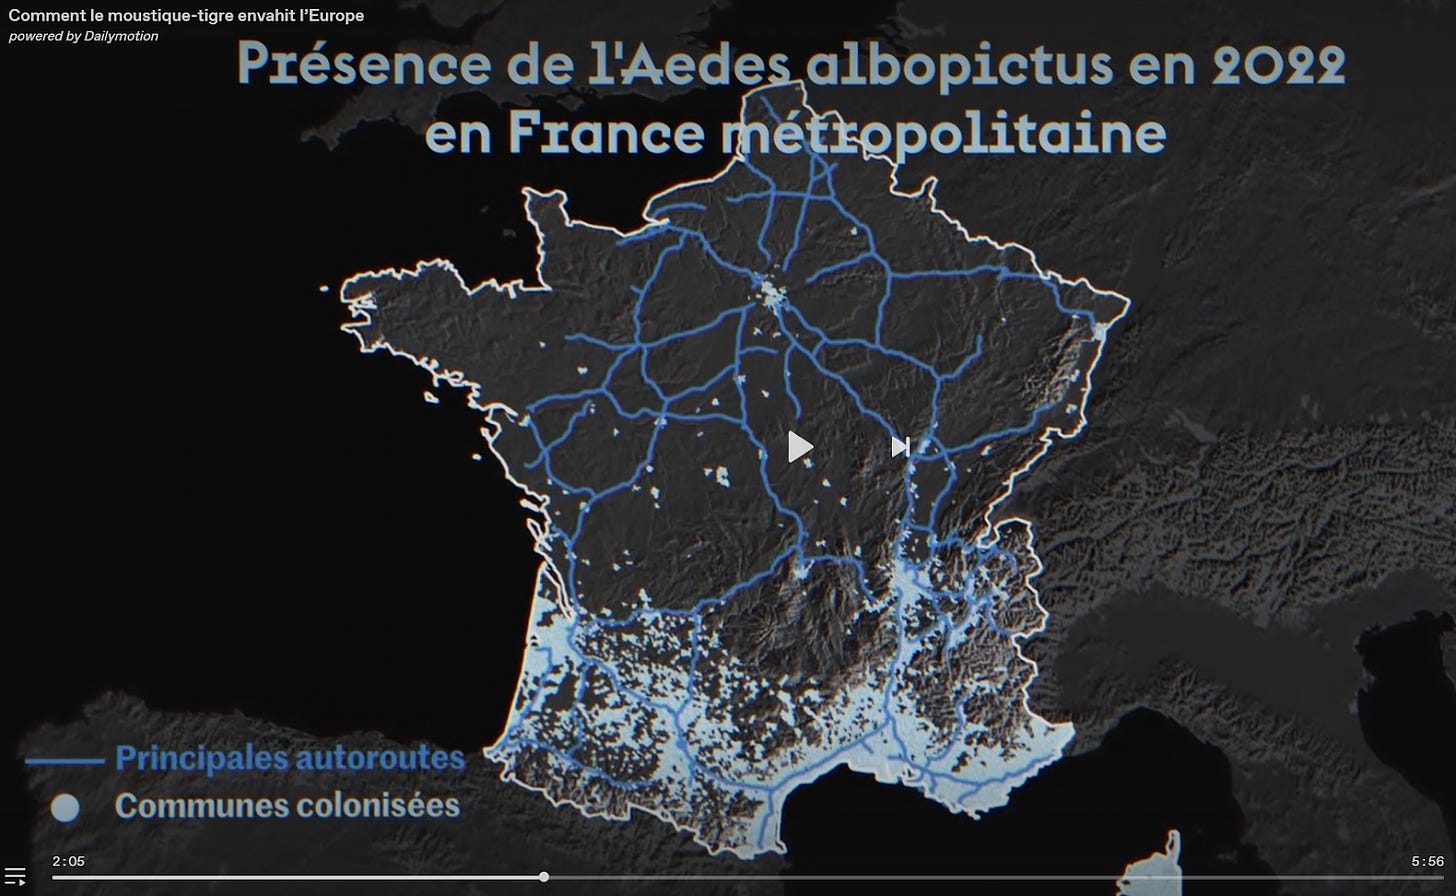 Map of the road network of France overlayed with the presence of tiger mosquito.